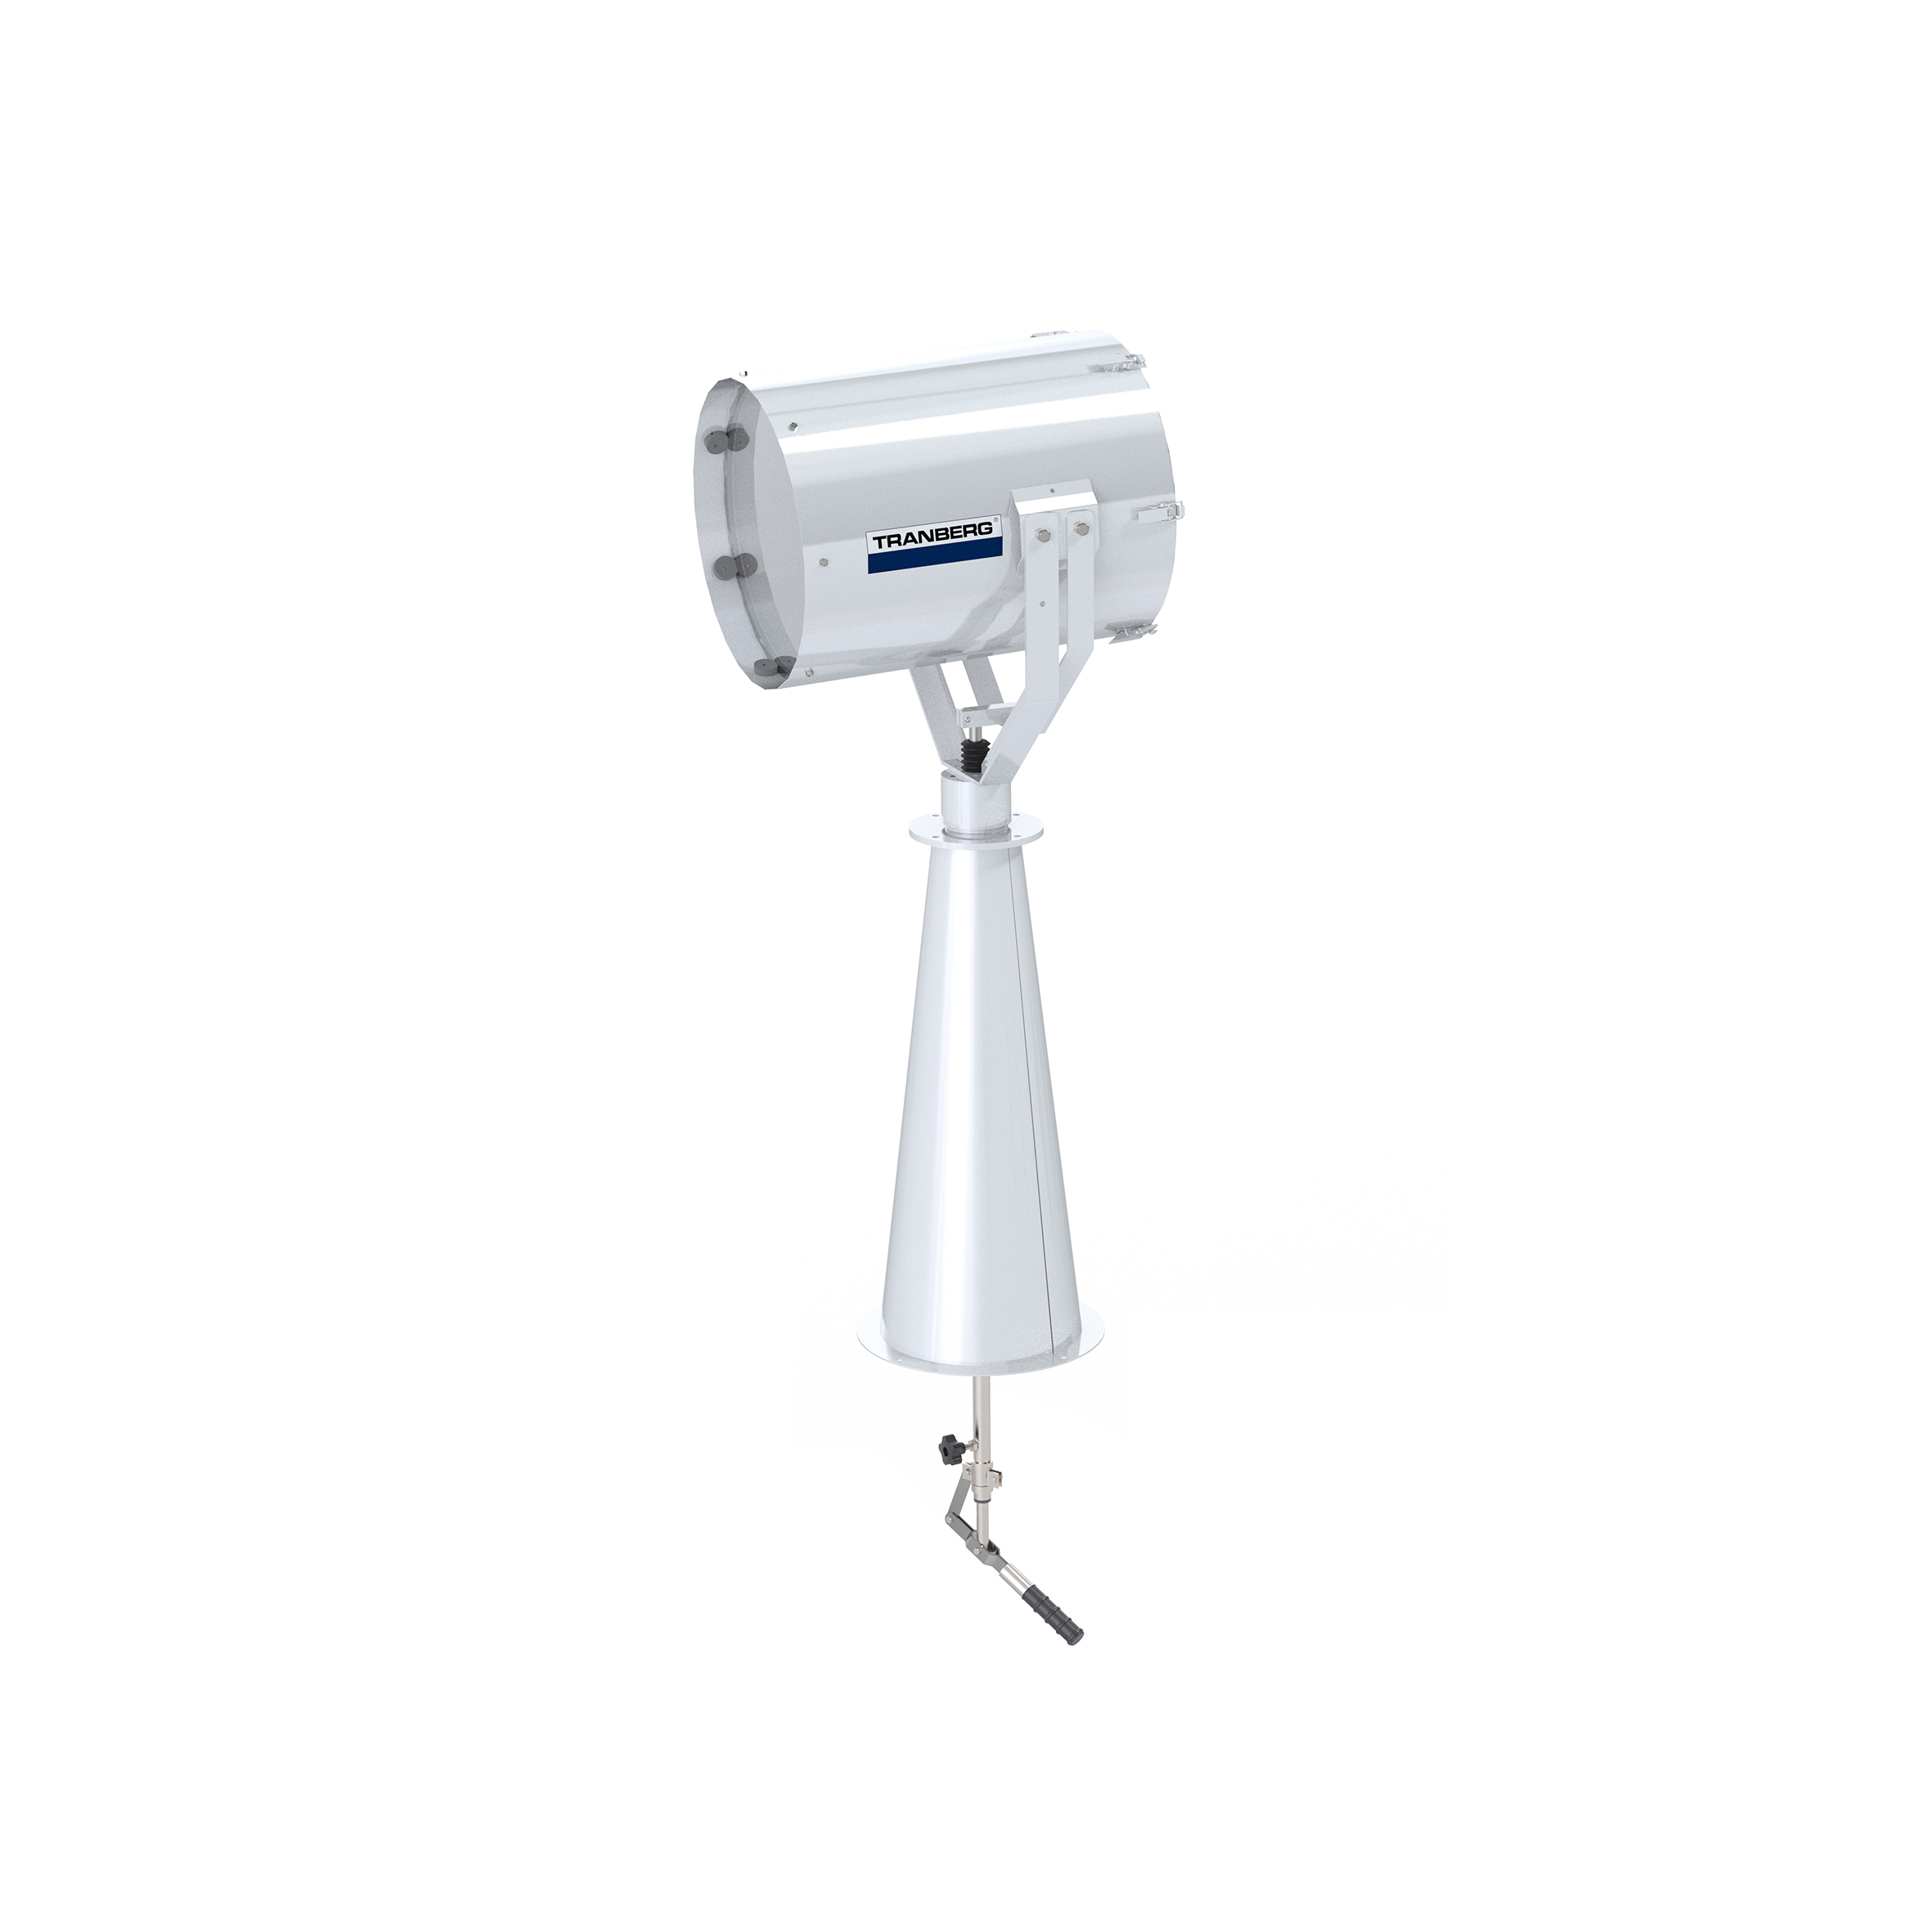 TEF 2630 Searchlight: Halogen 1000W bulb incl, 110V, Bridge Controlled, Stainless Steel, W/800 mm pe